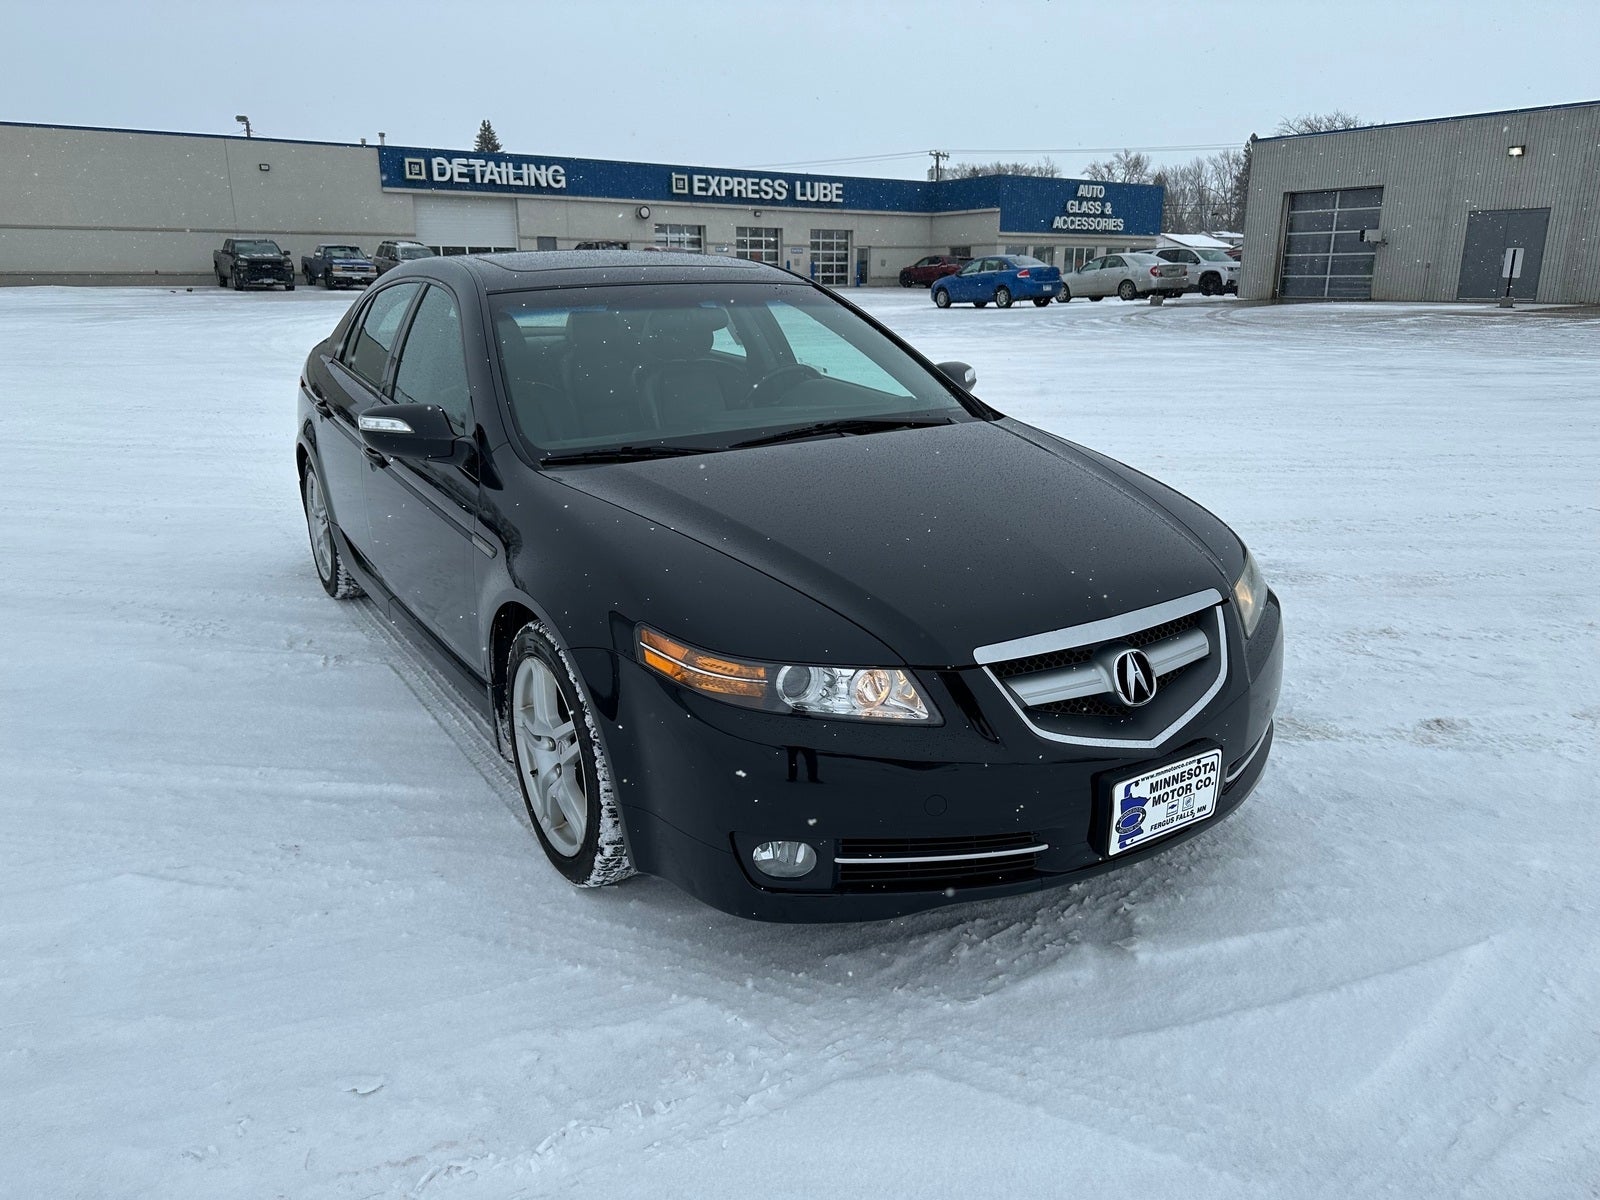 Used 2008 Acura TL  with VIN 19UUA66228A036807 for sale in Fergus Falls, Minnesota